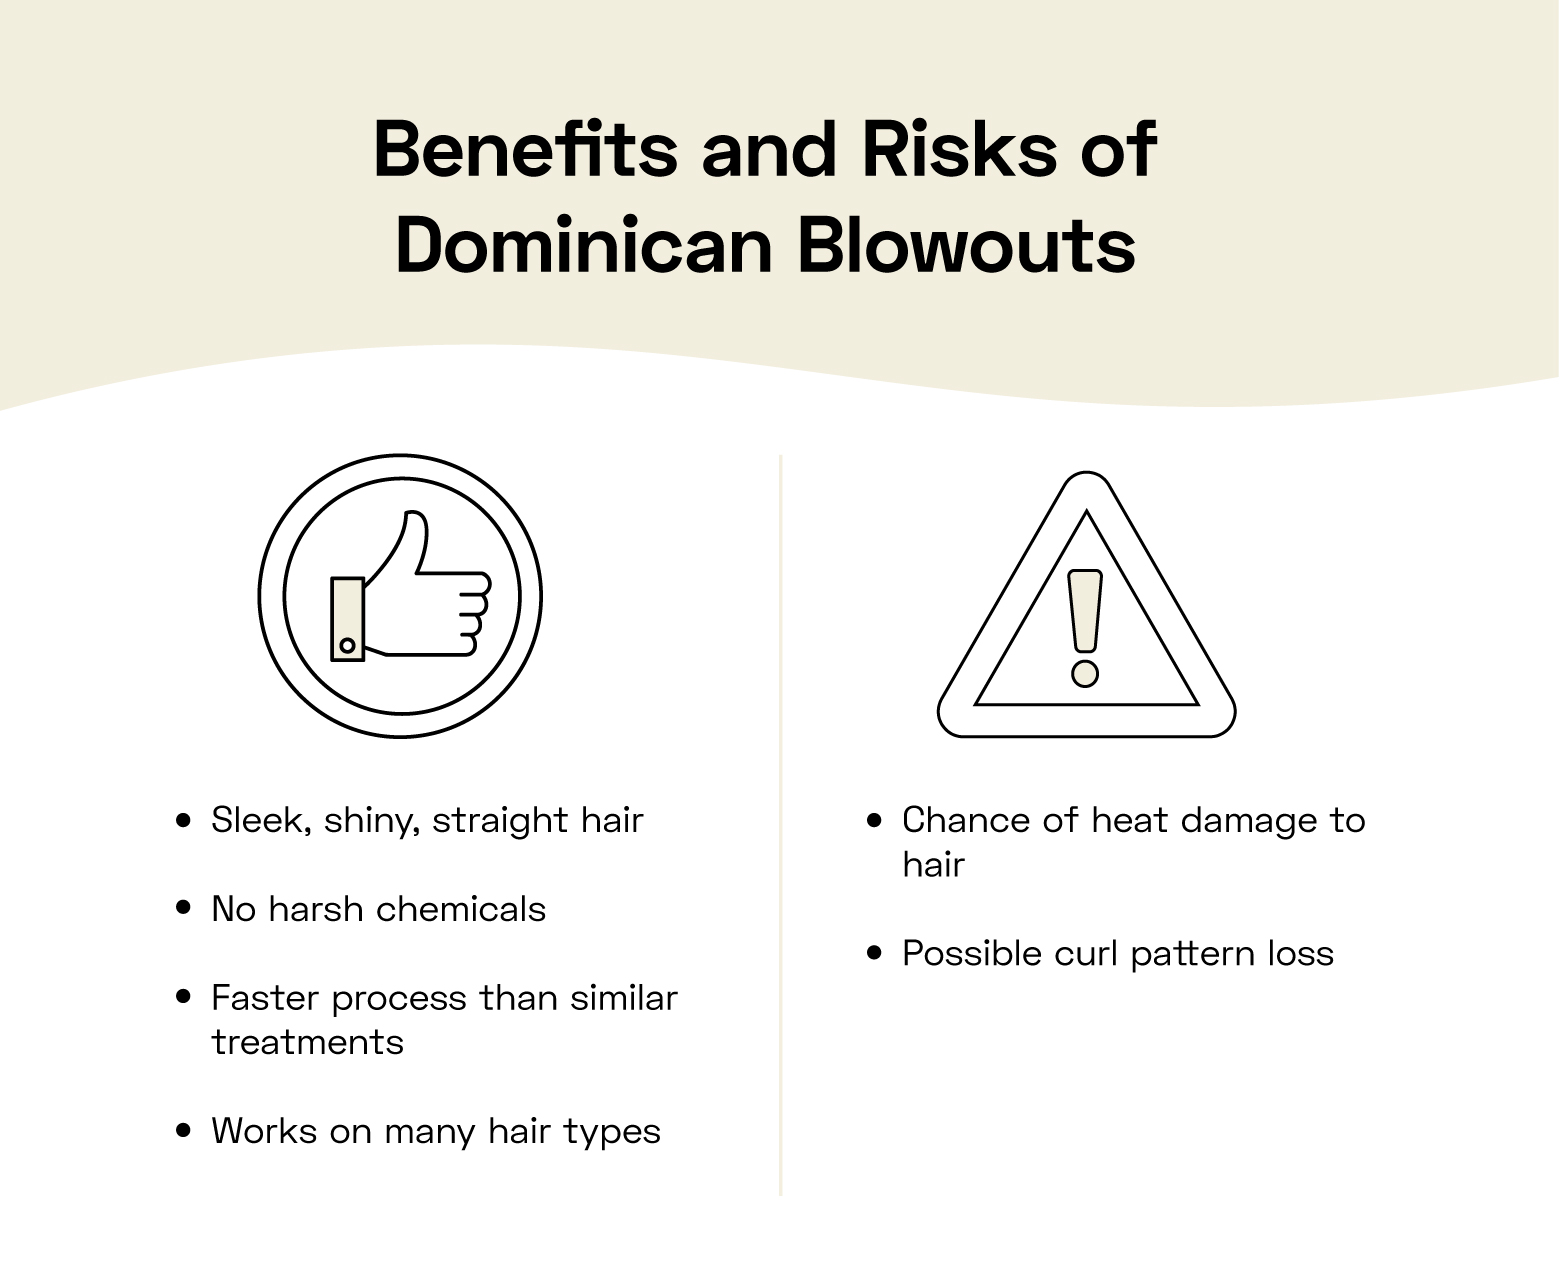 Benefits and risks of Dominican blowouts